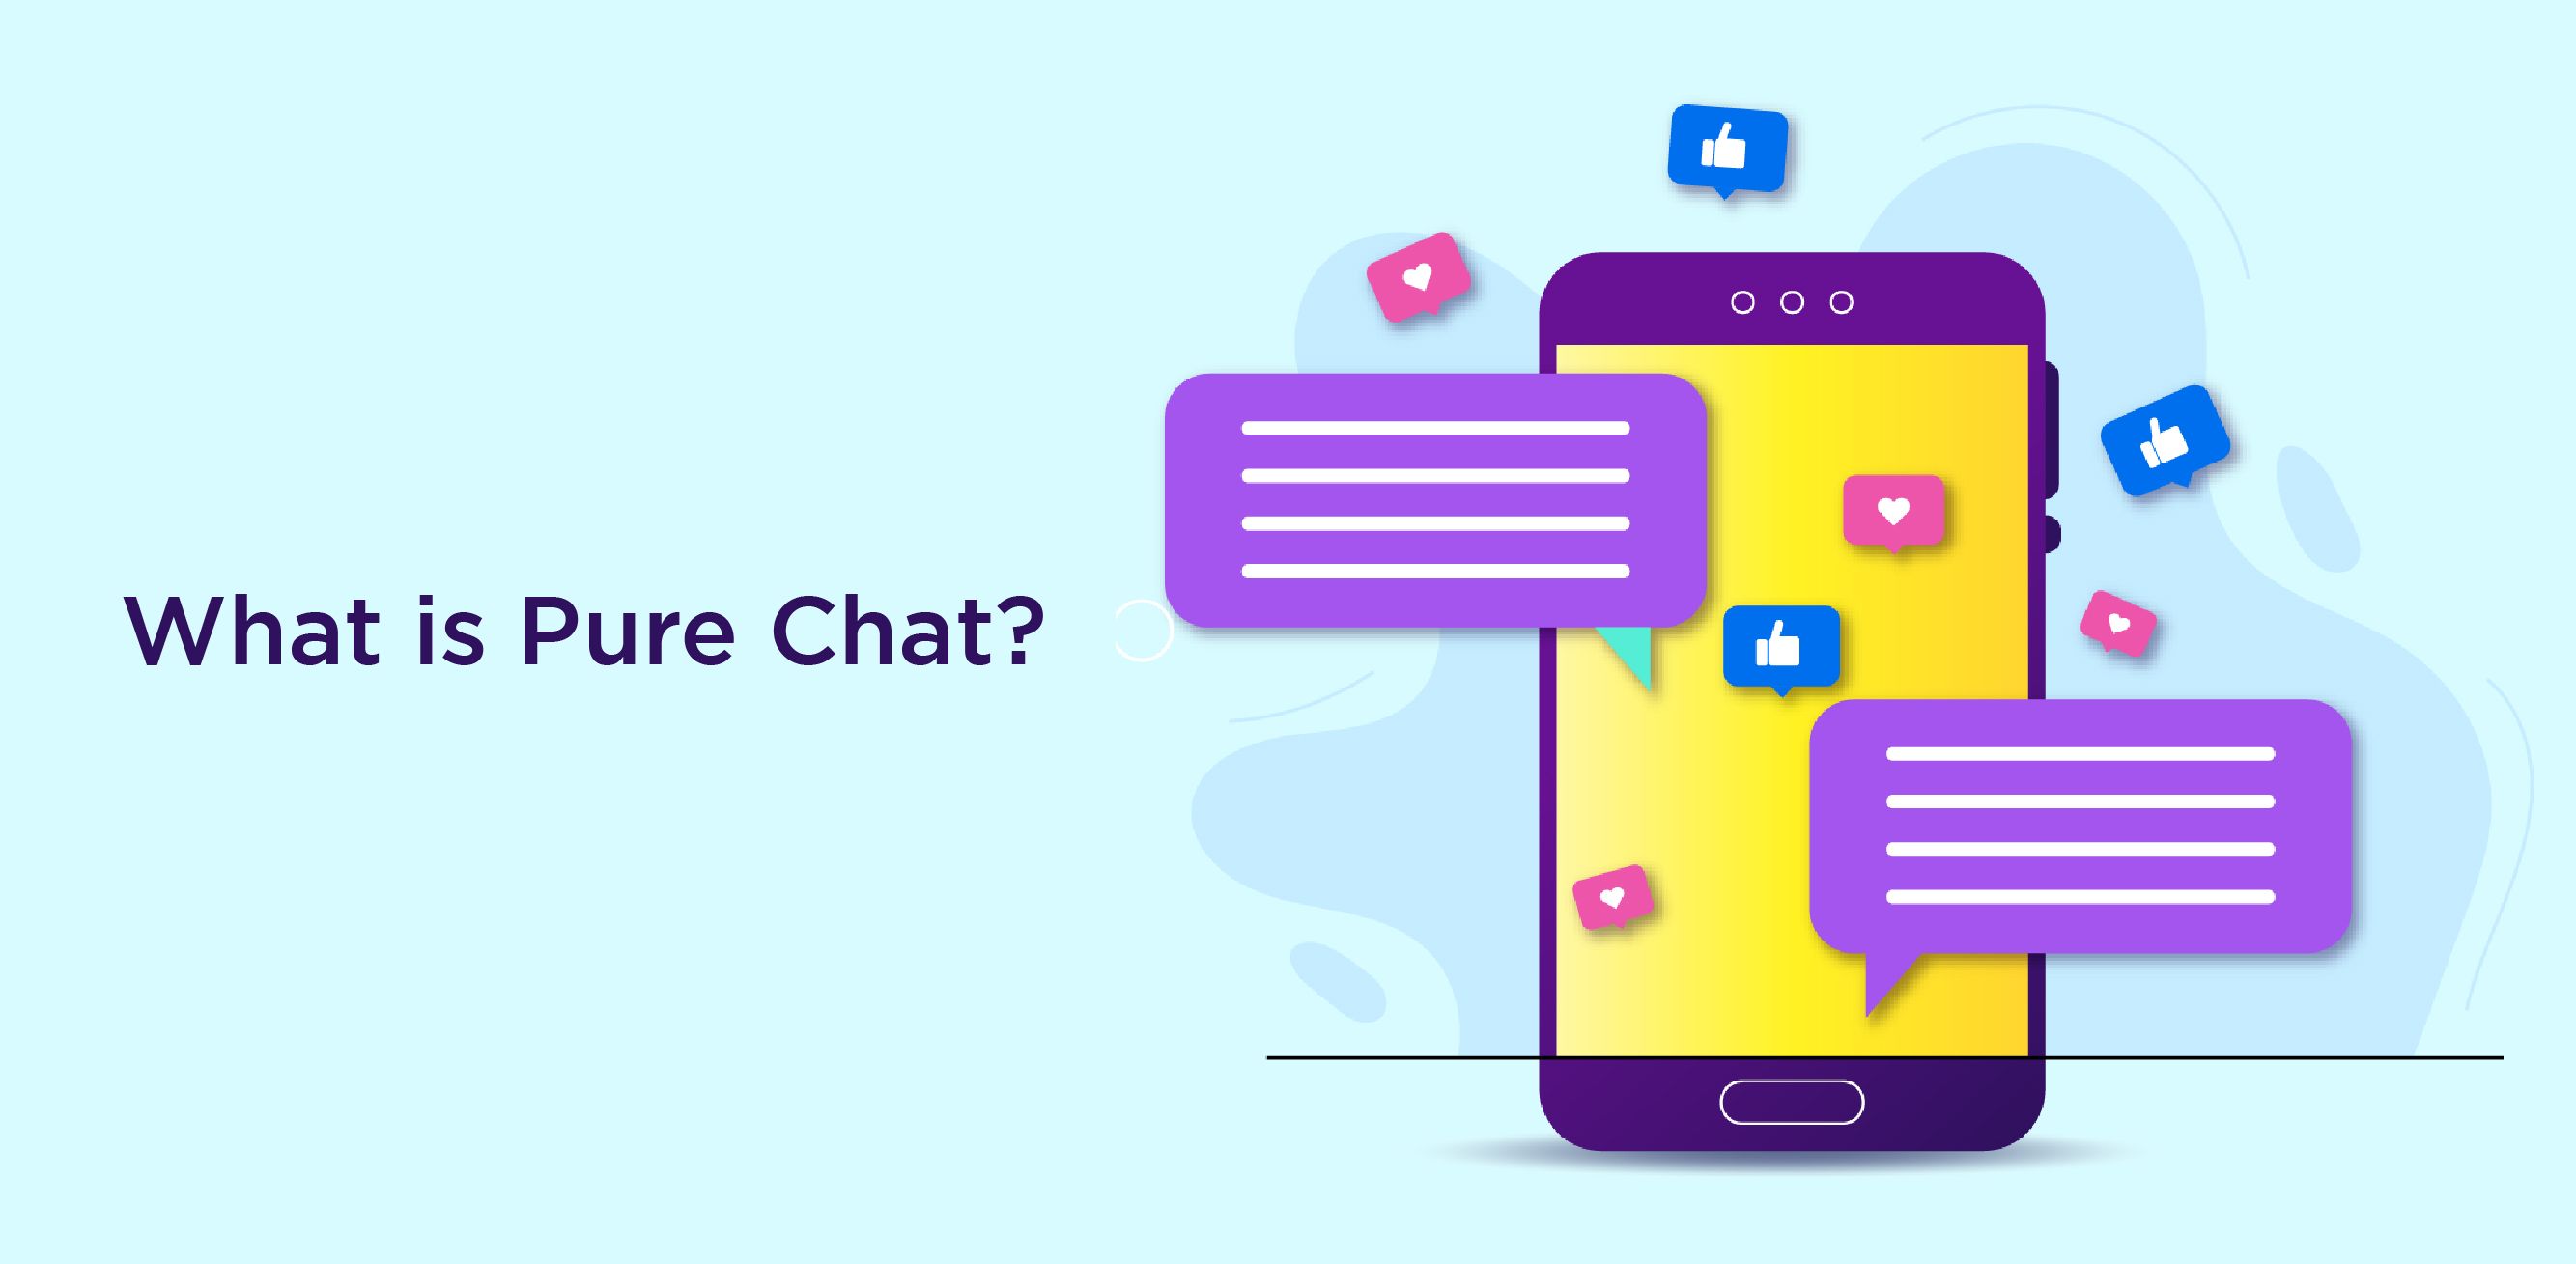 What is Pure Chat?